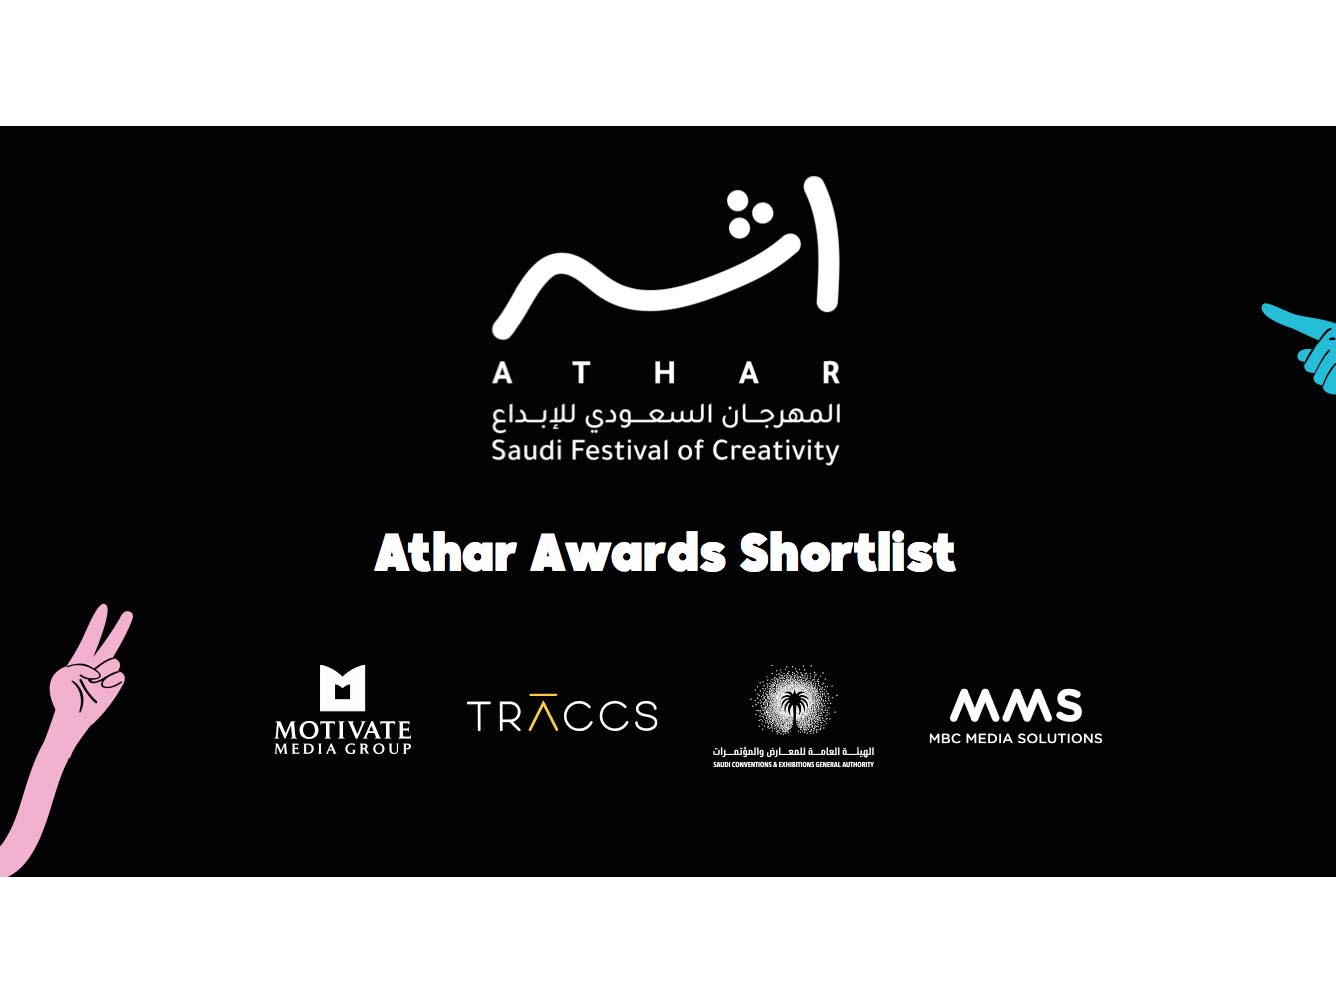 30 leading agencies shortlisted for the different Athar Awards categories